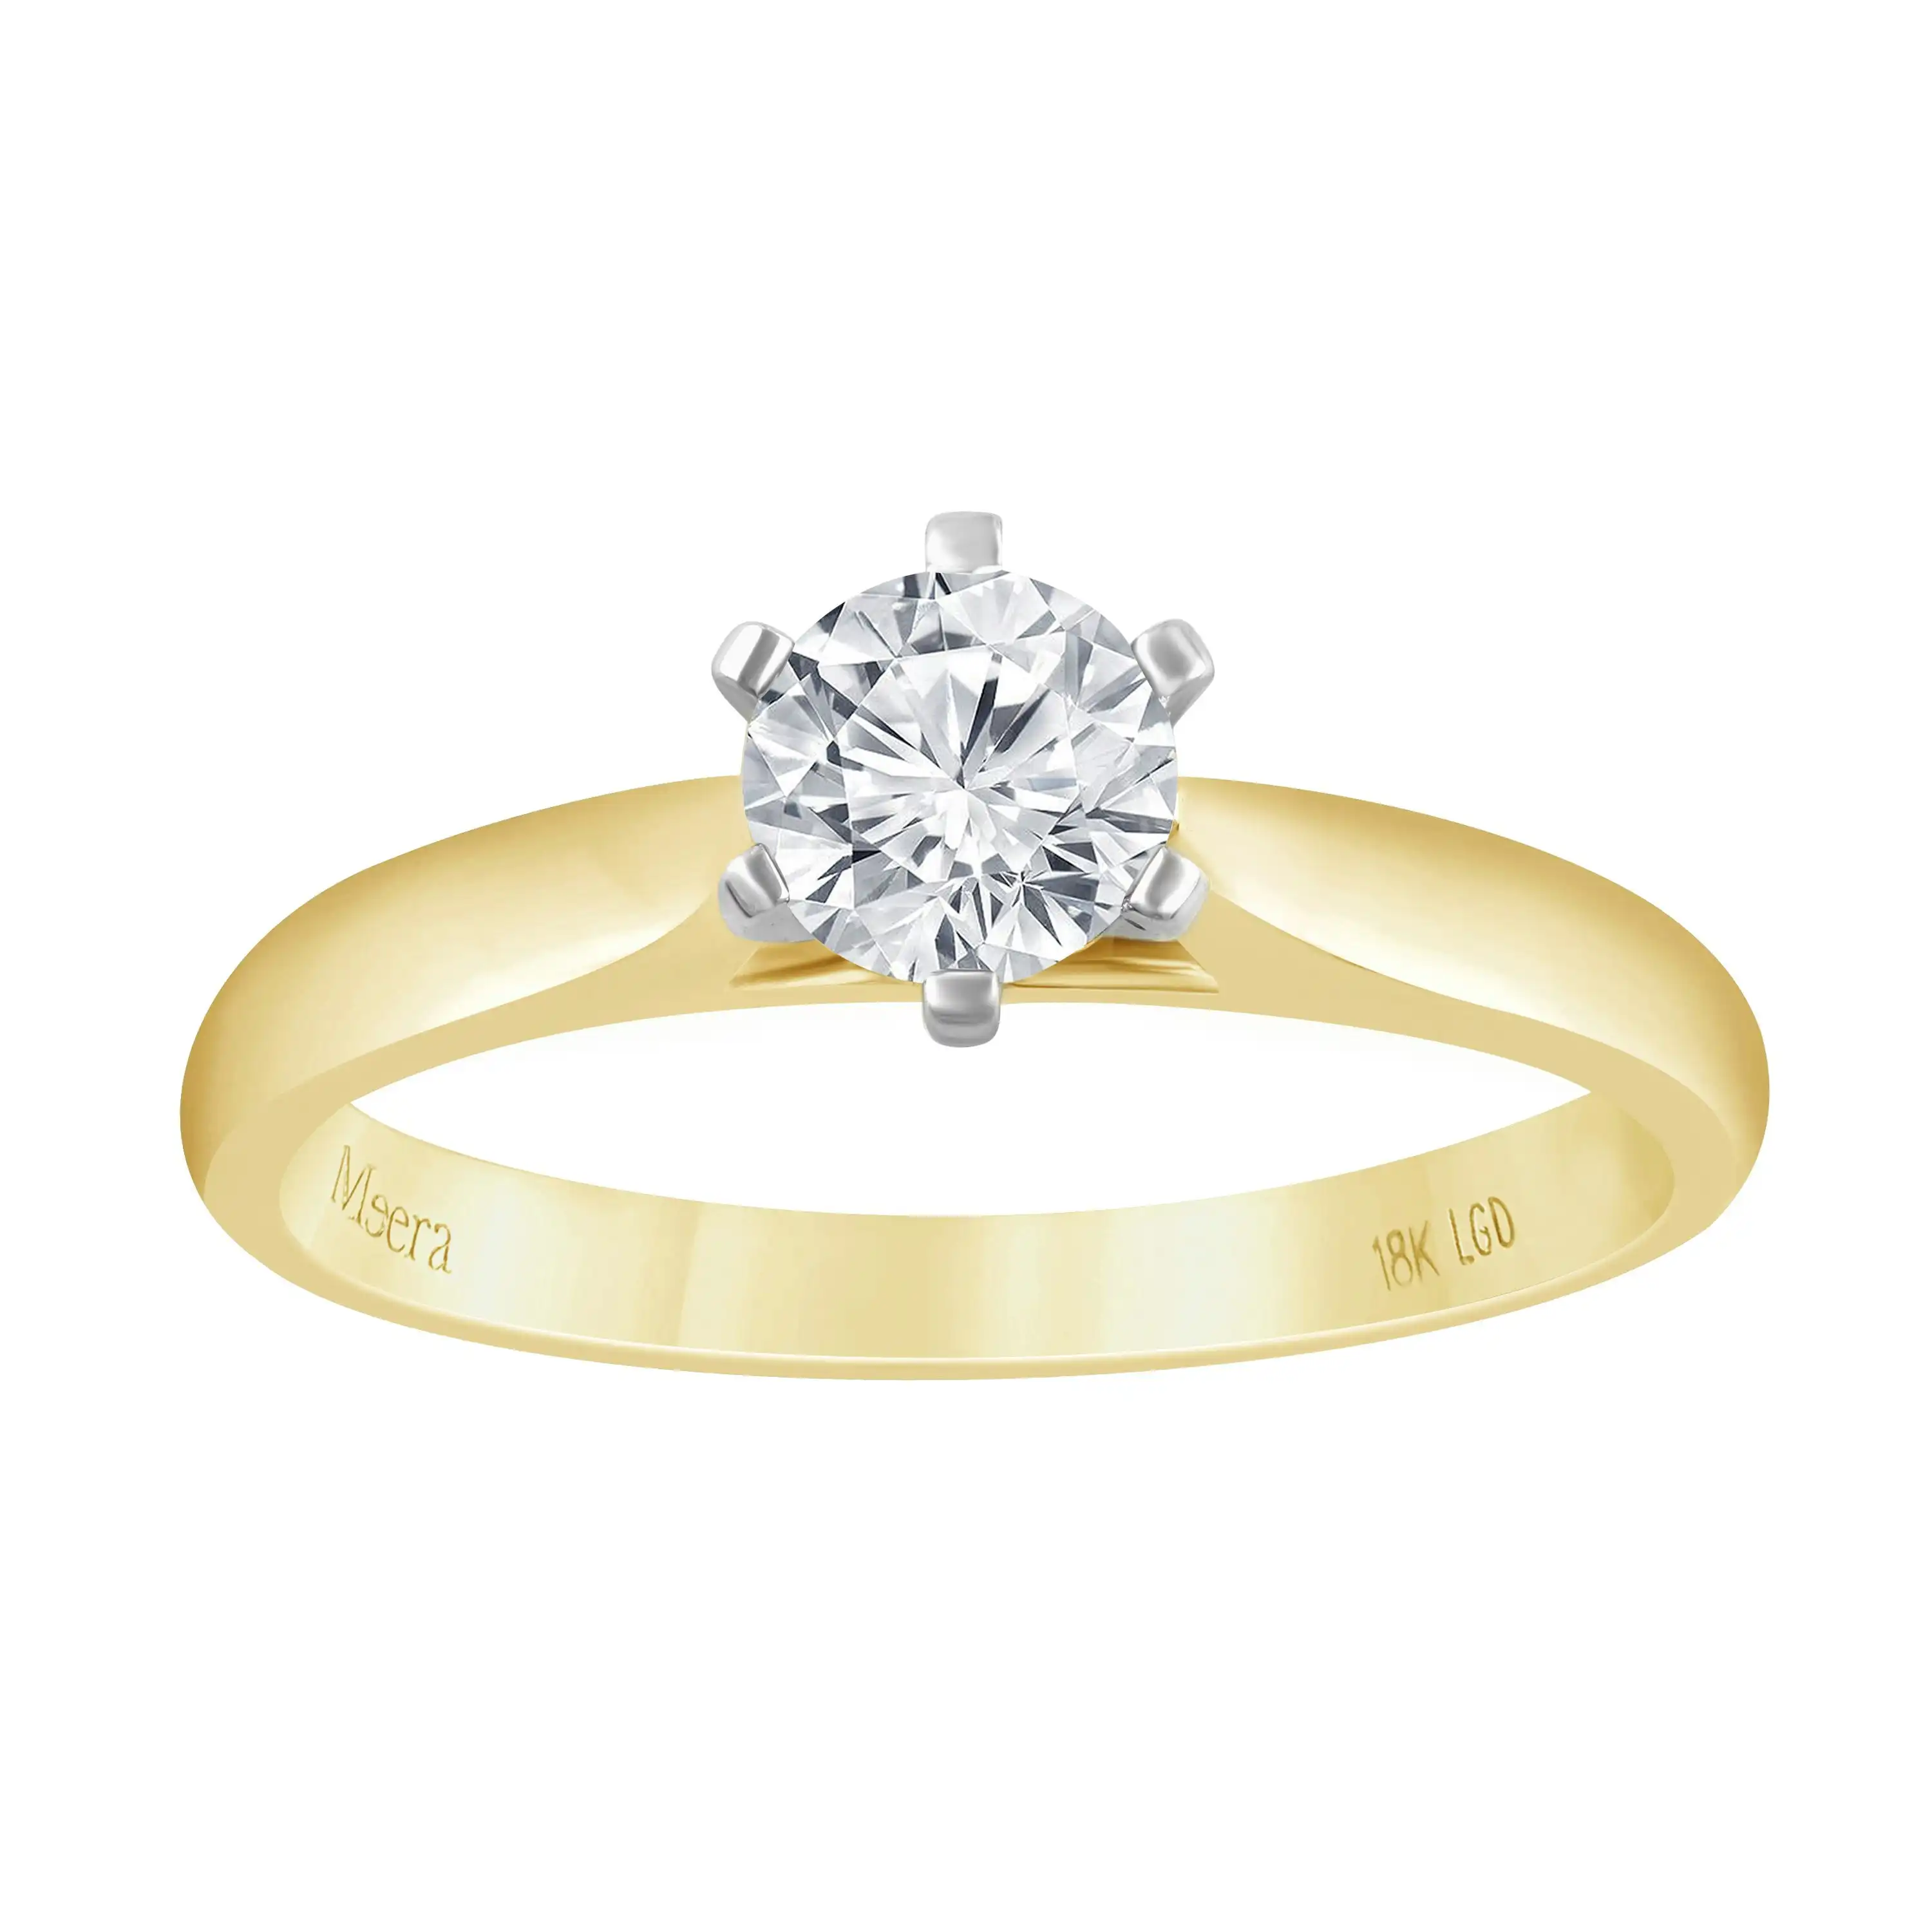 Meera 1/2ct Solitaire Laboratory Grown Diamond Ring in 18ct Yellow Gold